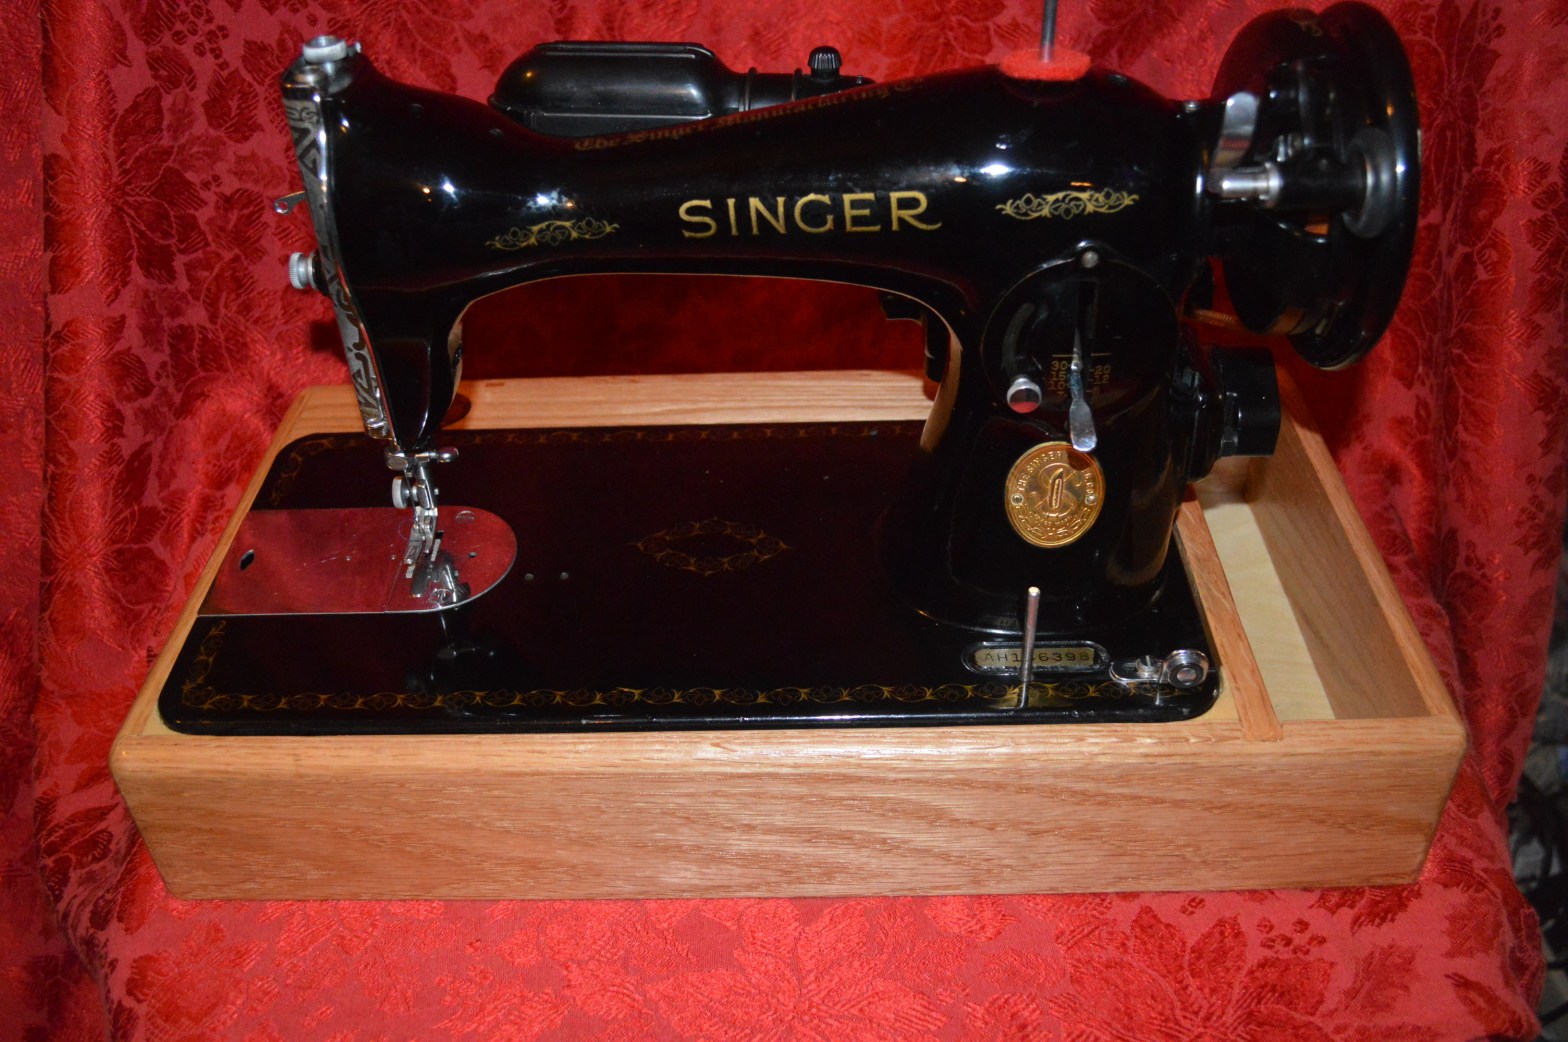 How to thread a vintage sewing machine - old singer sewing machine